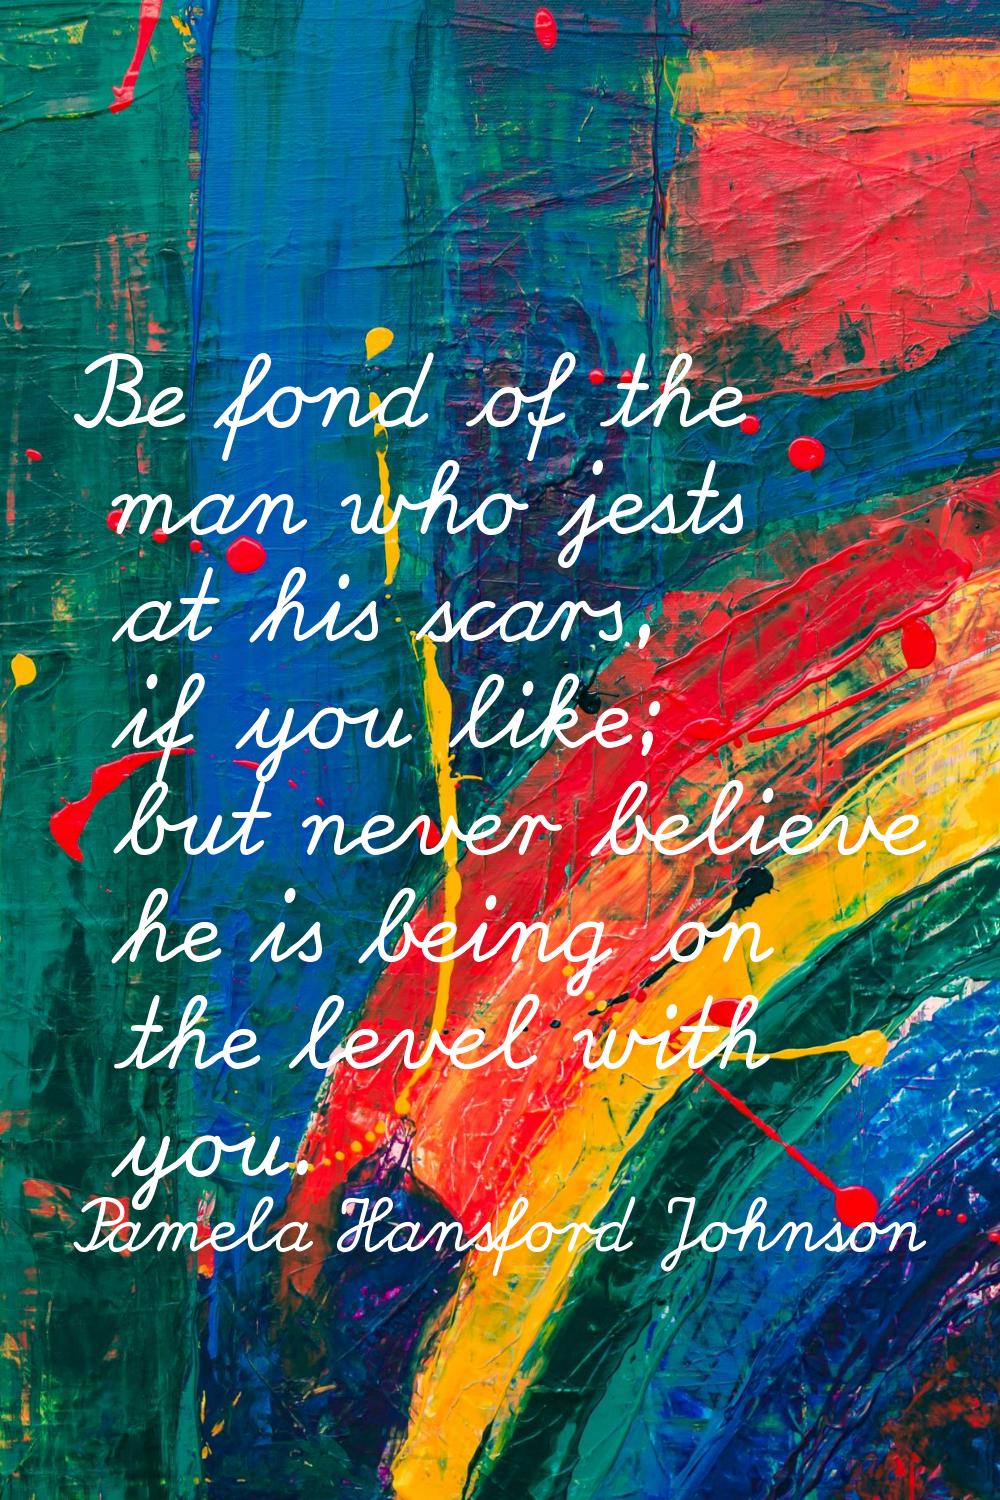 Be fond of the man who jests at his scars, if you like; but never believe he is being on the level 